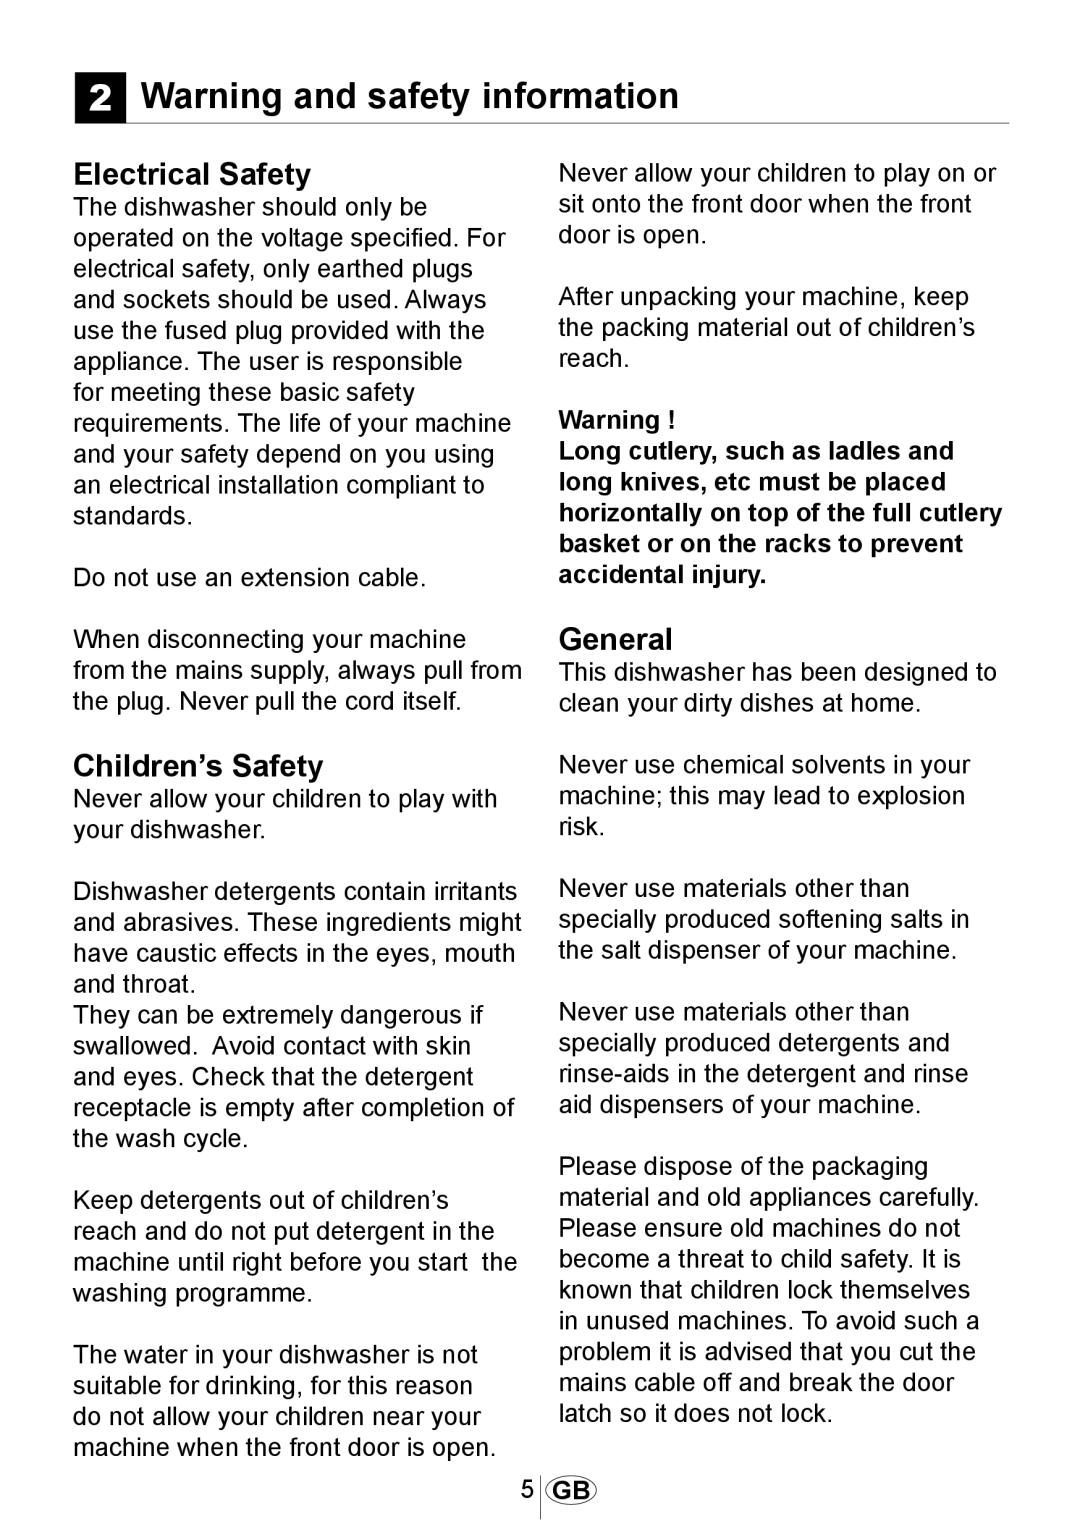 Beko DSFN1530 manual Warning and safety information, Electrical Safety, Children’s Safety, General 